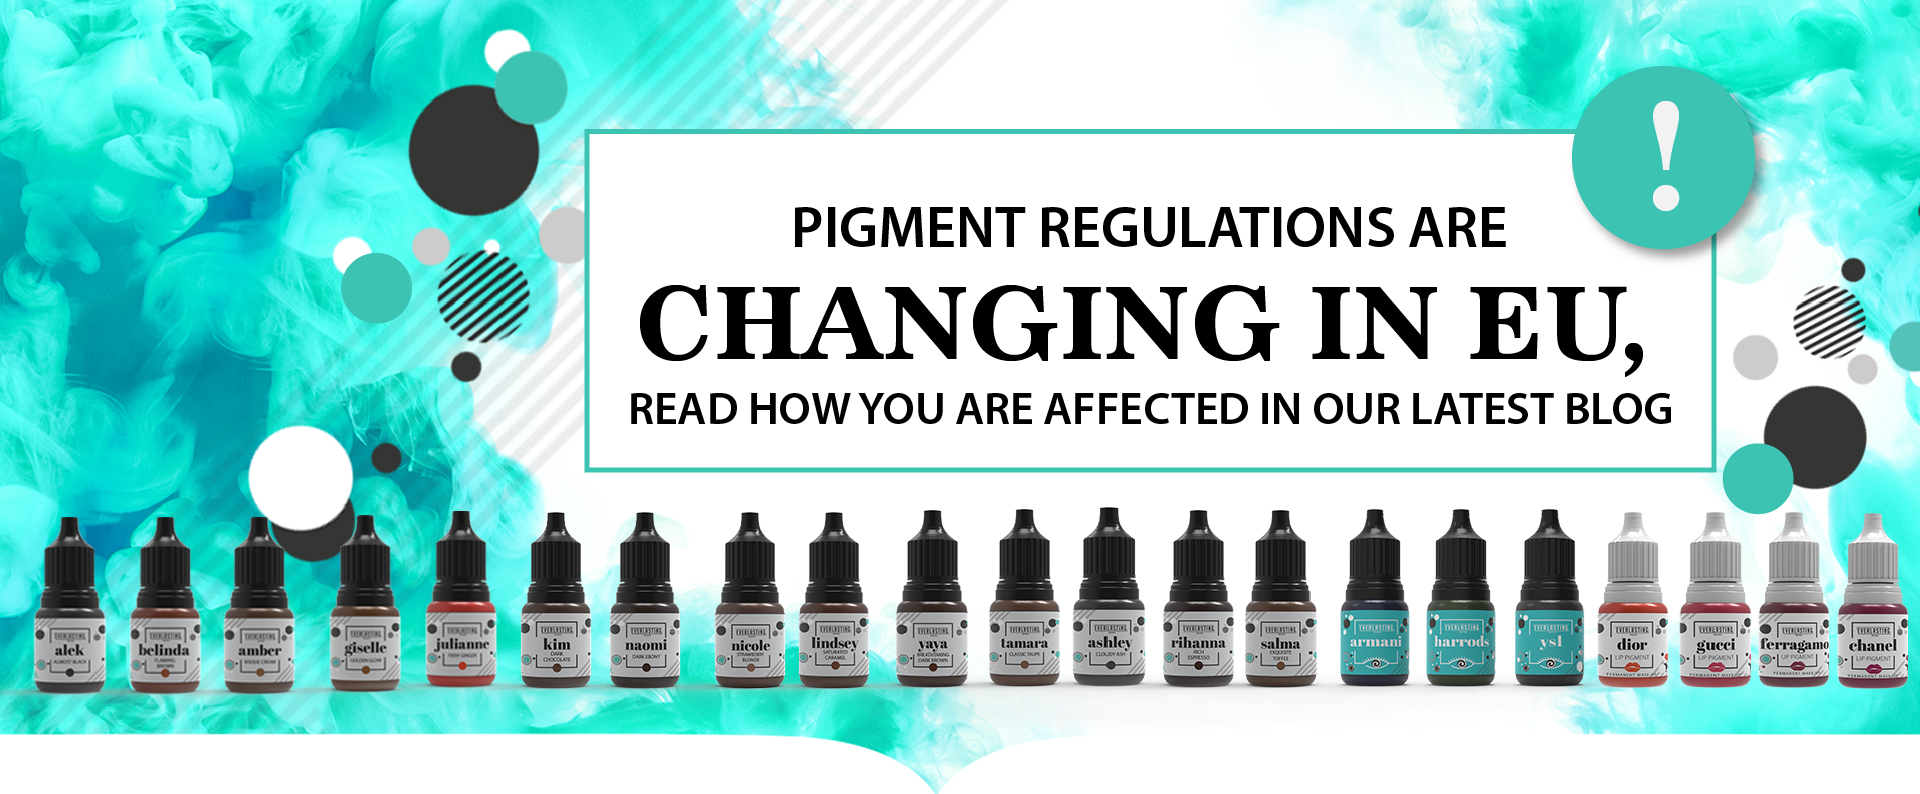 Pigment EU regulations are changing and YOU ARE AFFECTED